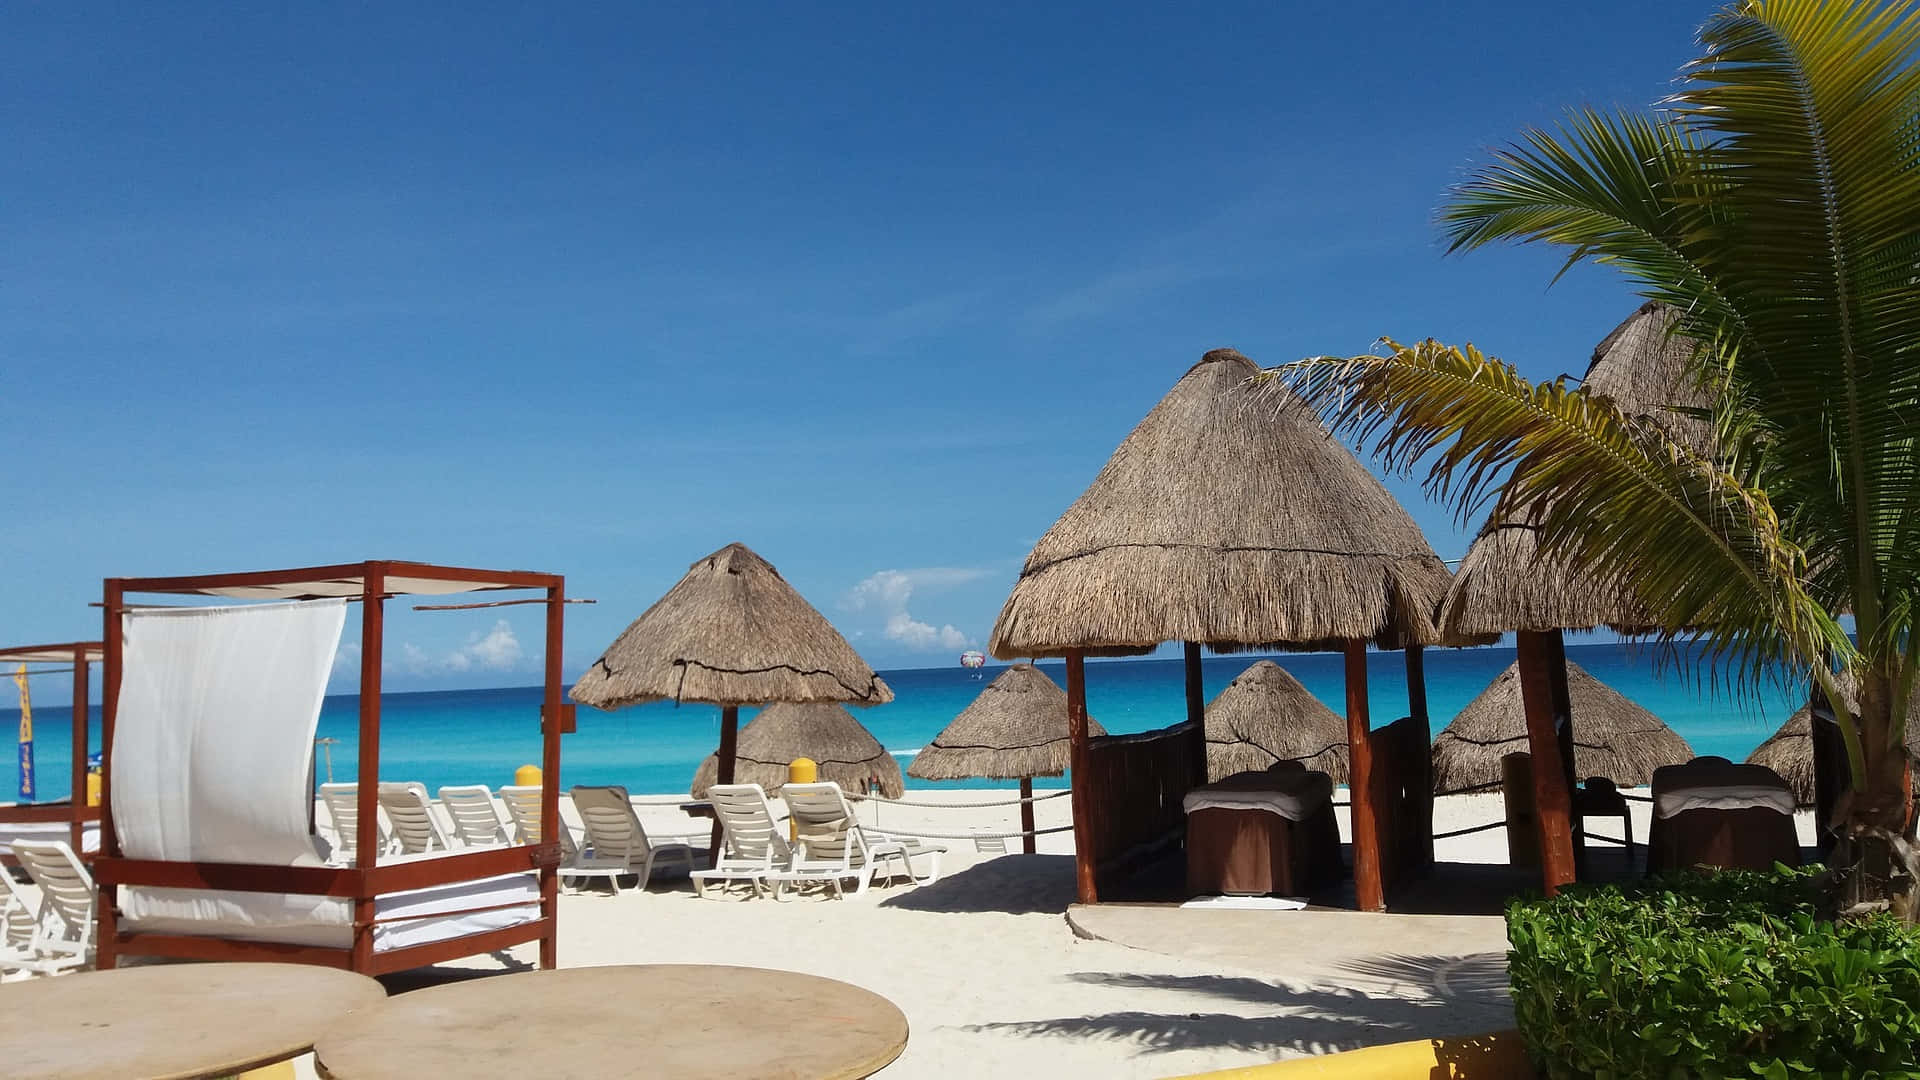 Discover the paradise of Cancun, Mexico